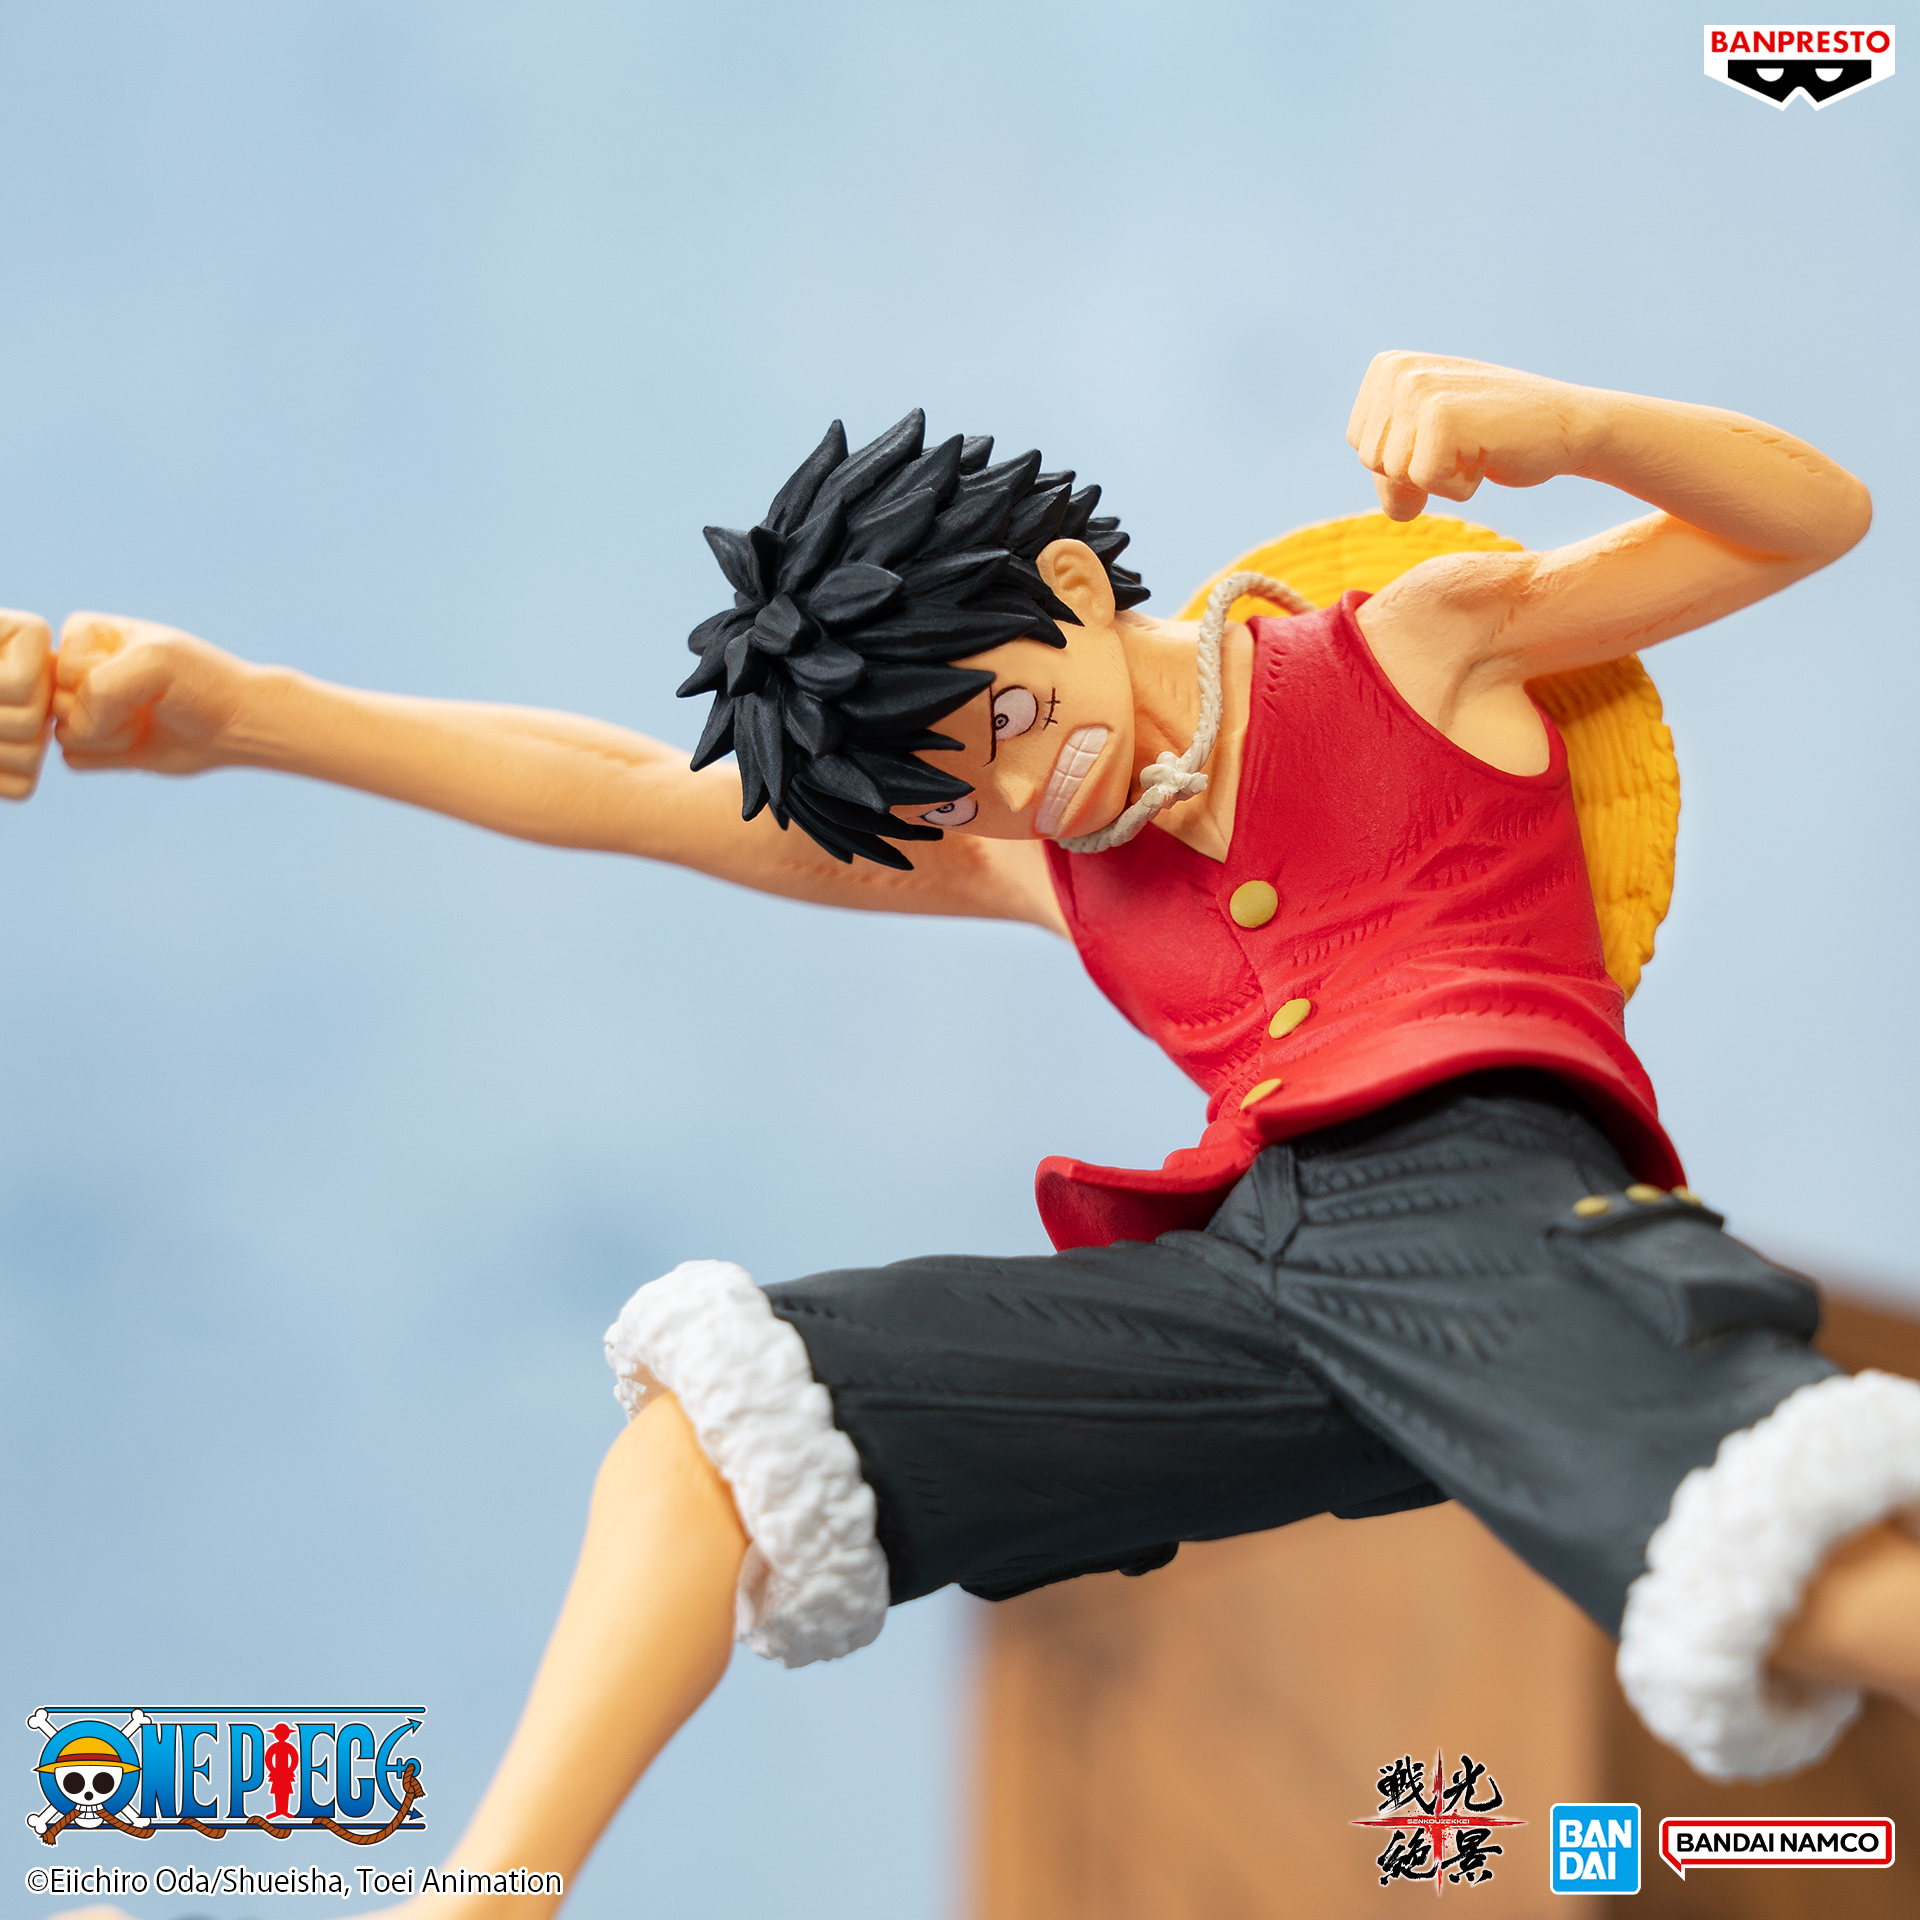 OFFICIAL Monkey D Luffy【Exclusive on One Piece Figure】